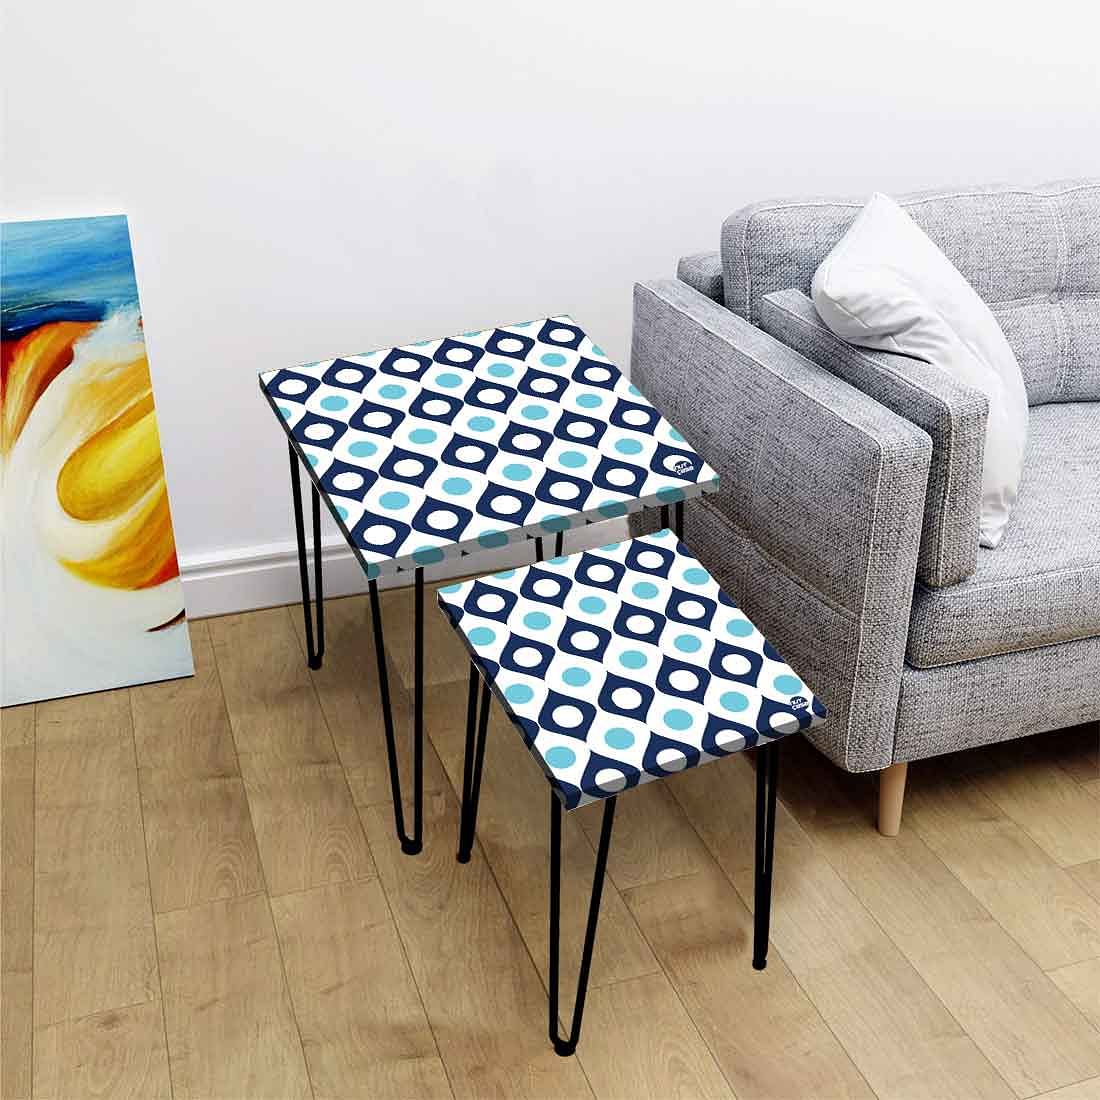 Coffee Table Nesting Set of 2 for Living Room Home Decor - Blue Dots Nutcase